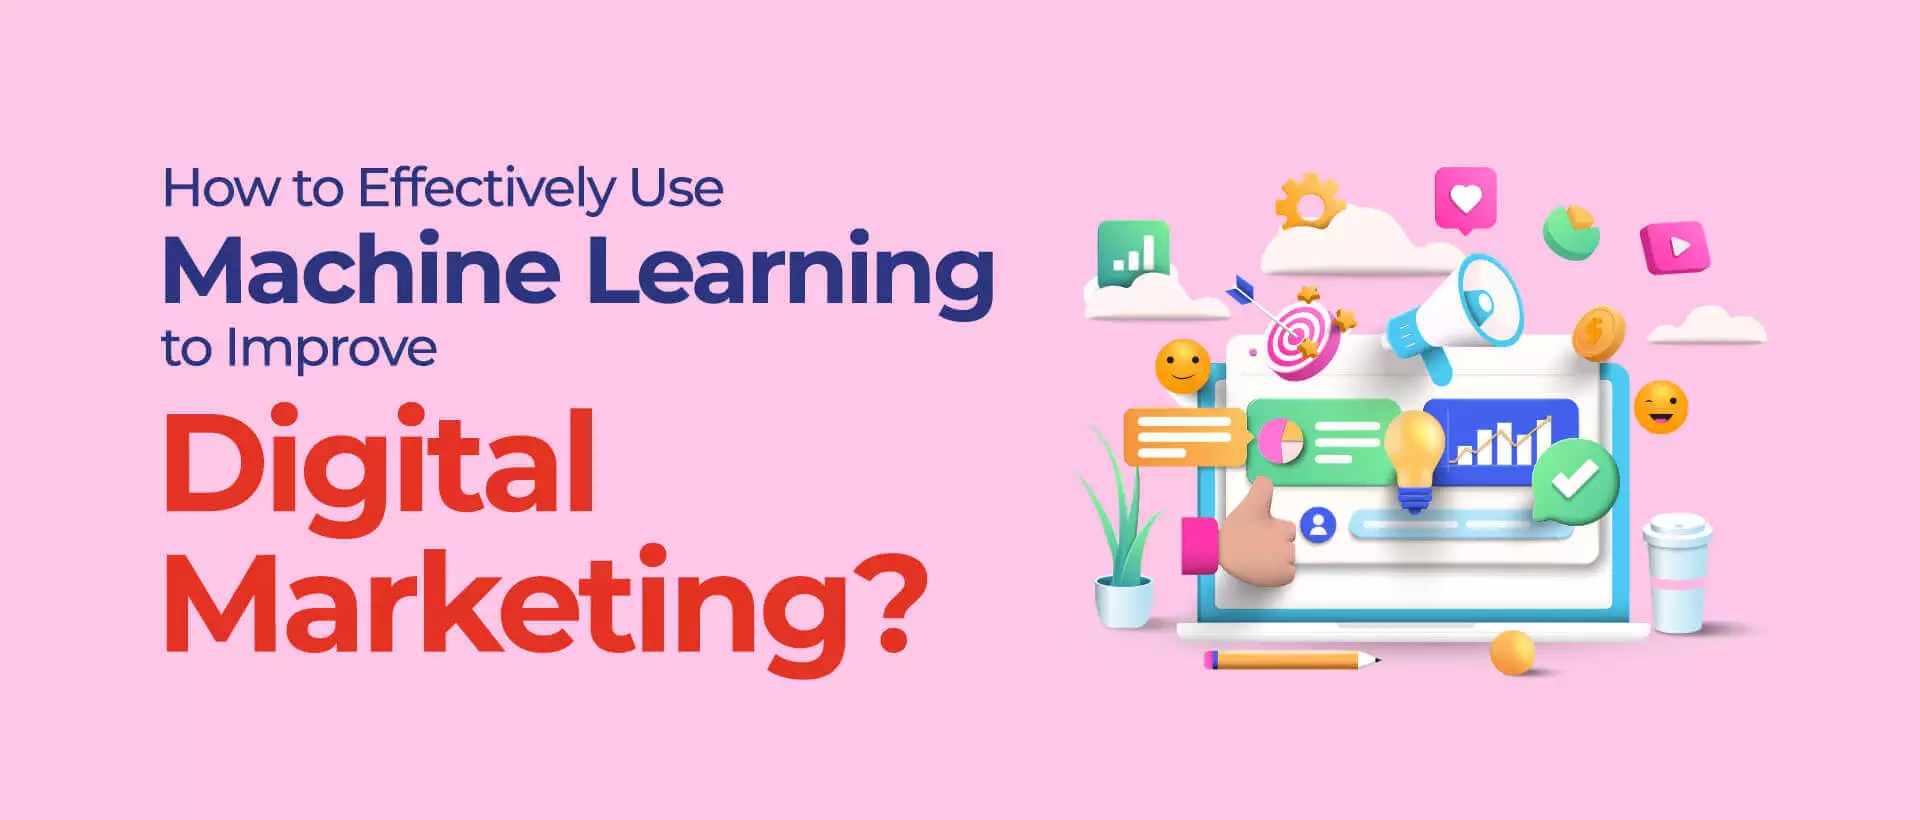 How to Effectively Use Machine Learning to Improve Digital Marketing?